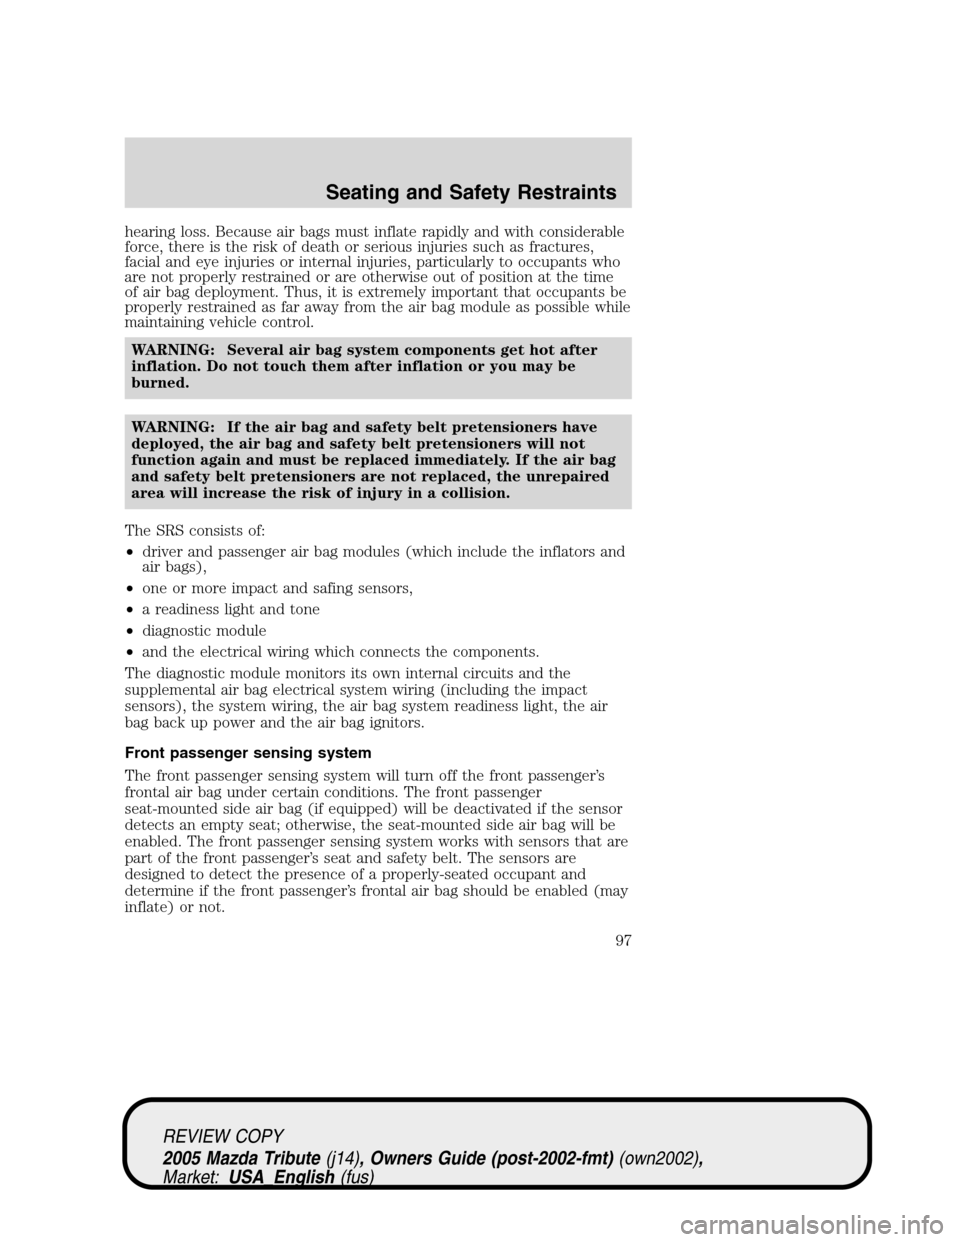 MAZDA MODEL TRIBUTE 2005  Owners Manual (in English) hearing loss. Because air bags must inflate rapidly and with considerable
force, there is the risk of death or serious injuries such as fractures,
facial and eye injuries or internal injuries, particu